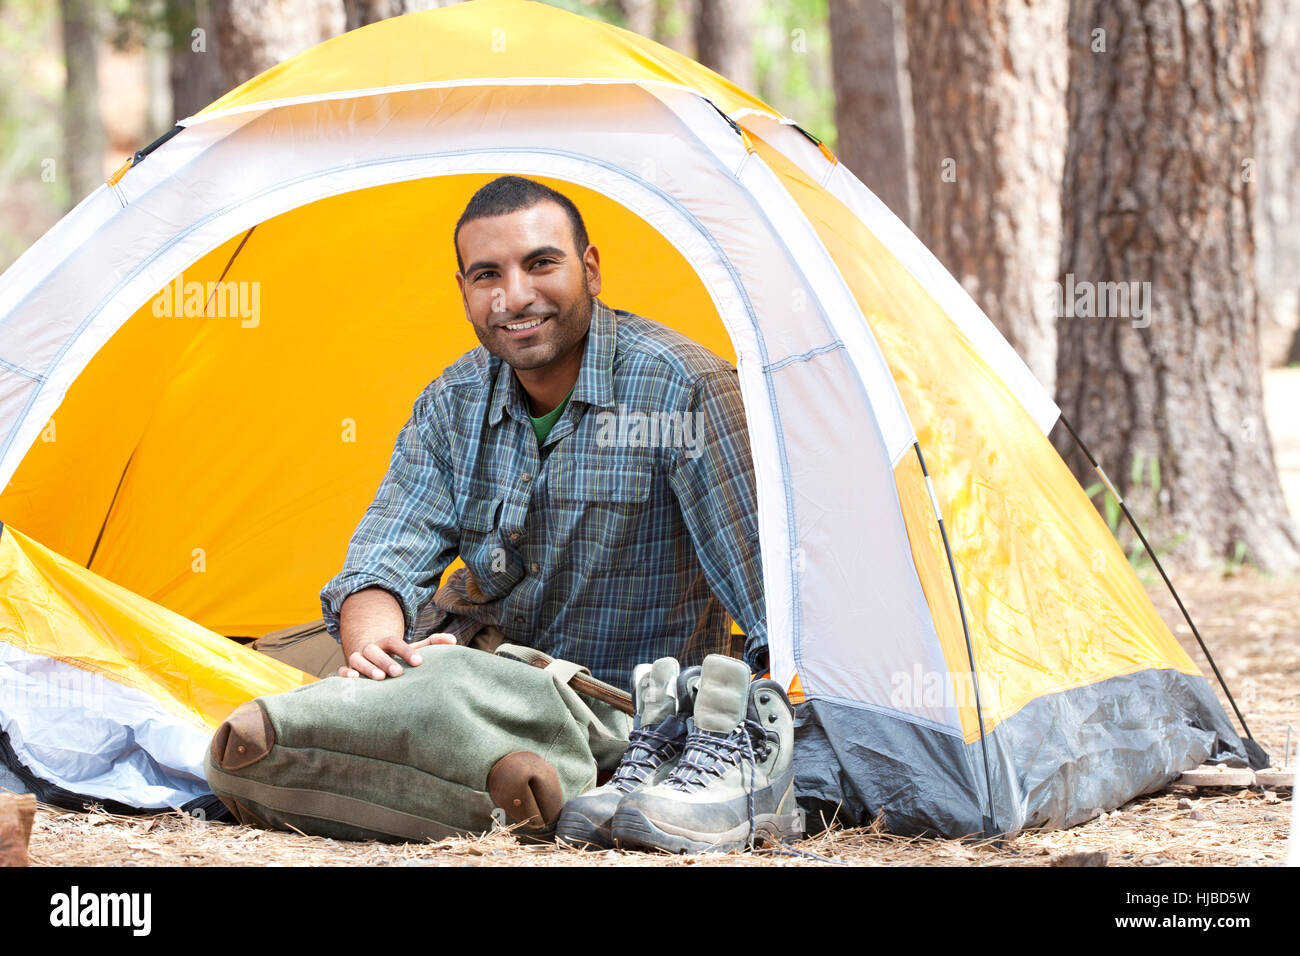 Portrait of young man sitting in dome tent in forest, Sedona, Arizona, USA Stock Photo